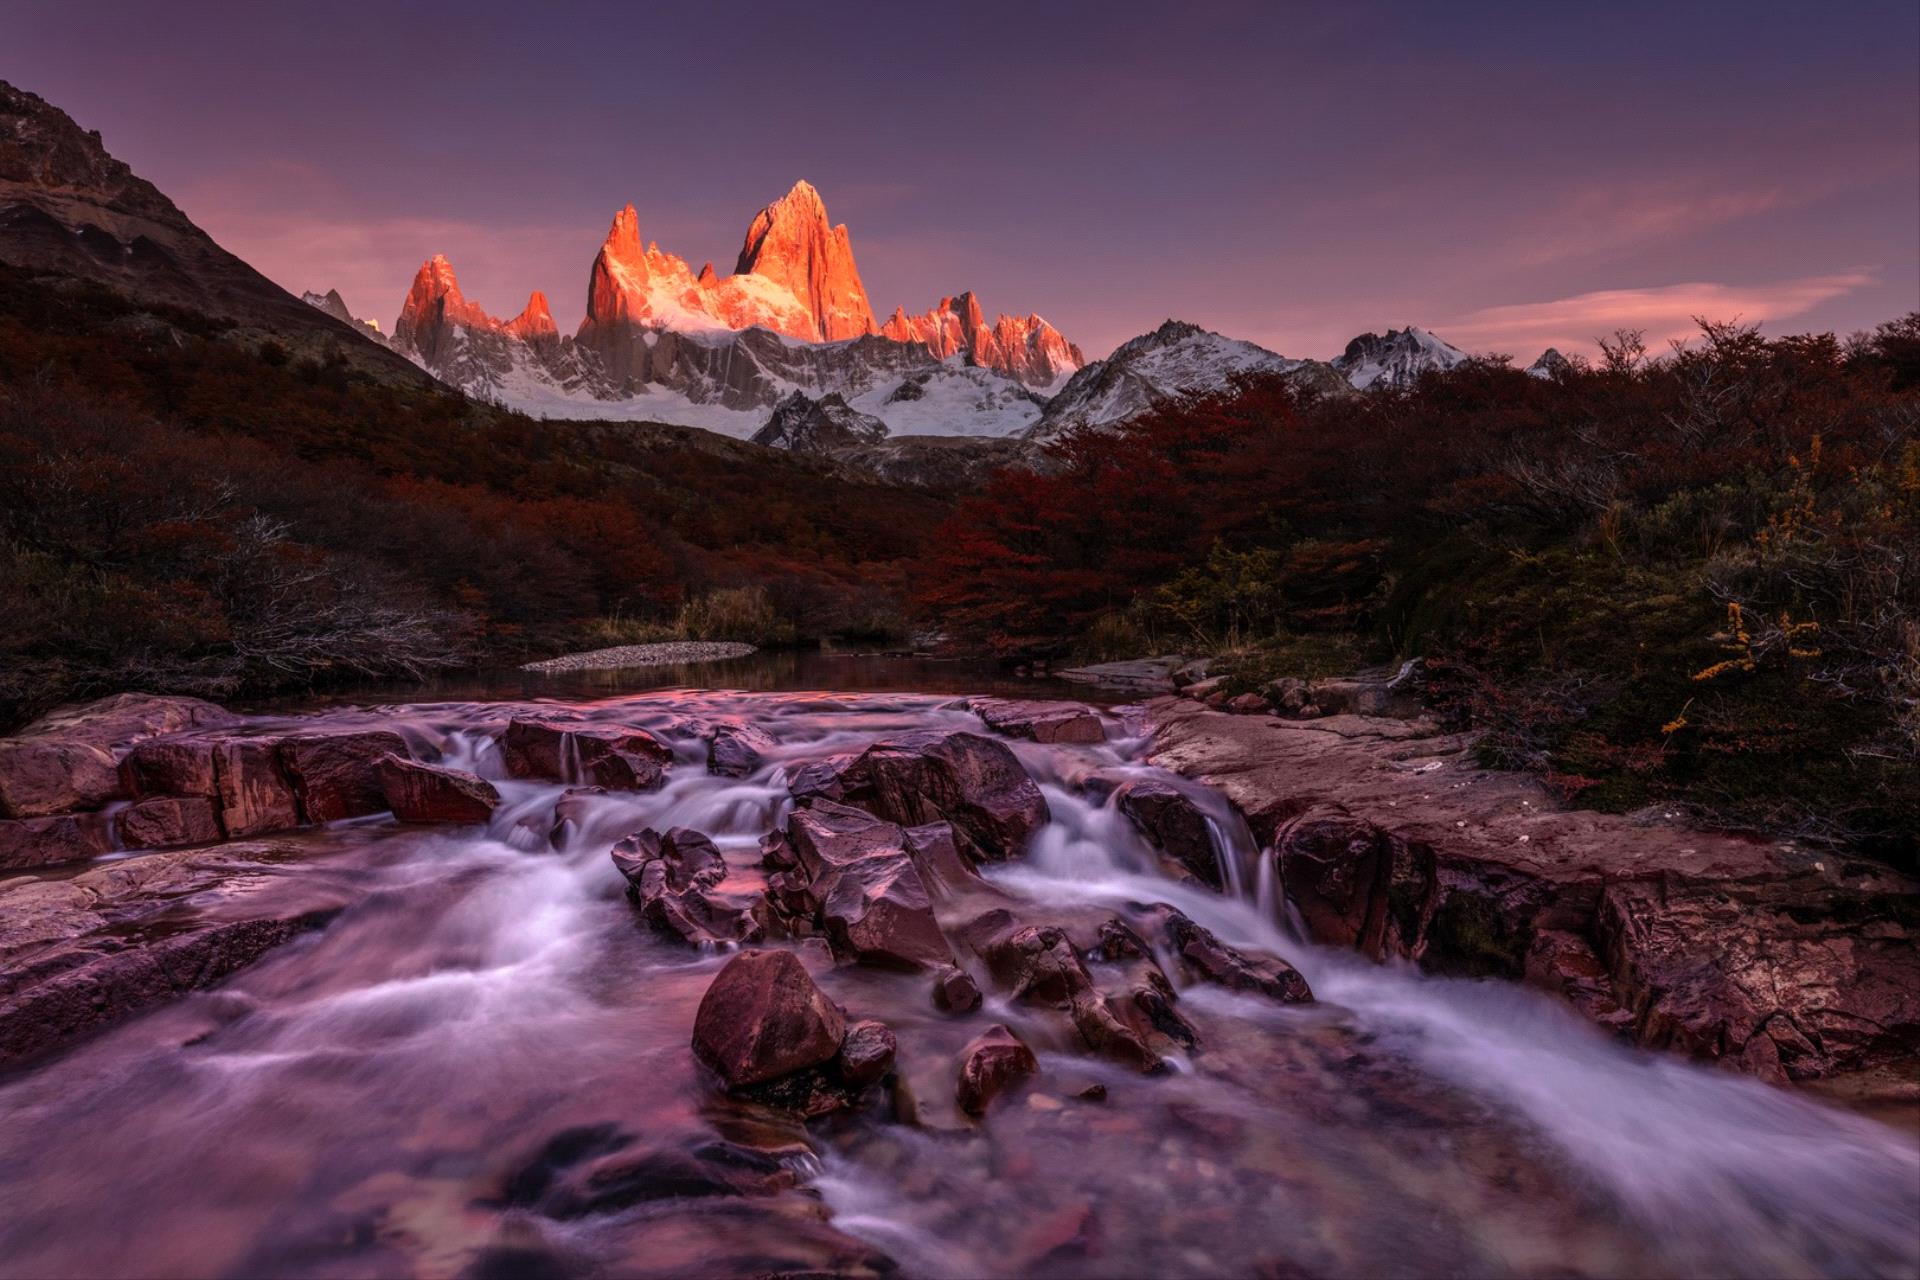 Golden Dragon Photo Award - Alexey Suloev (Russian Federation) - The First Rays-Fitz Roy